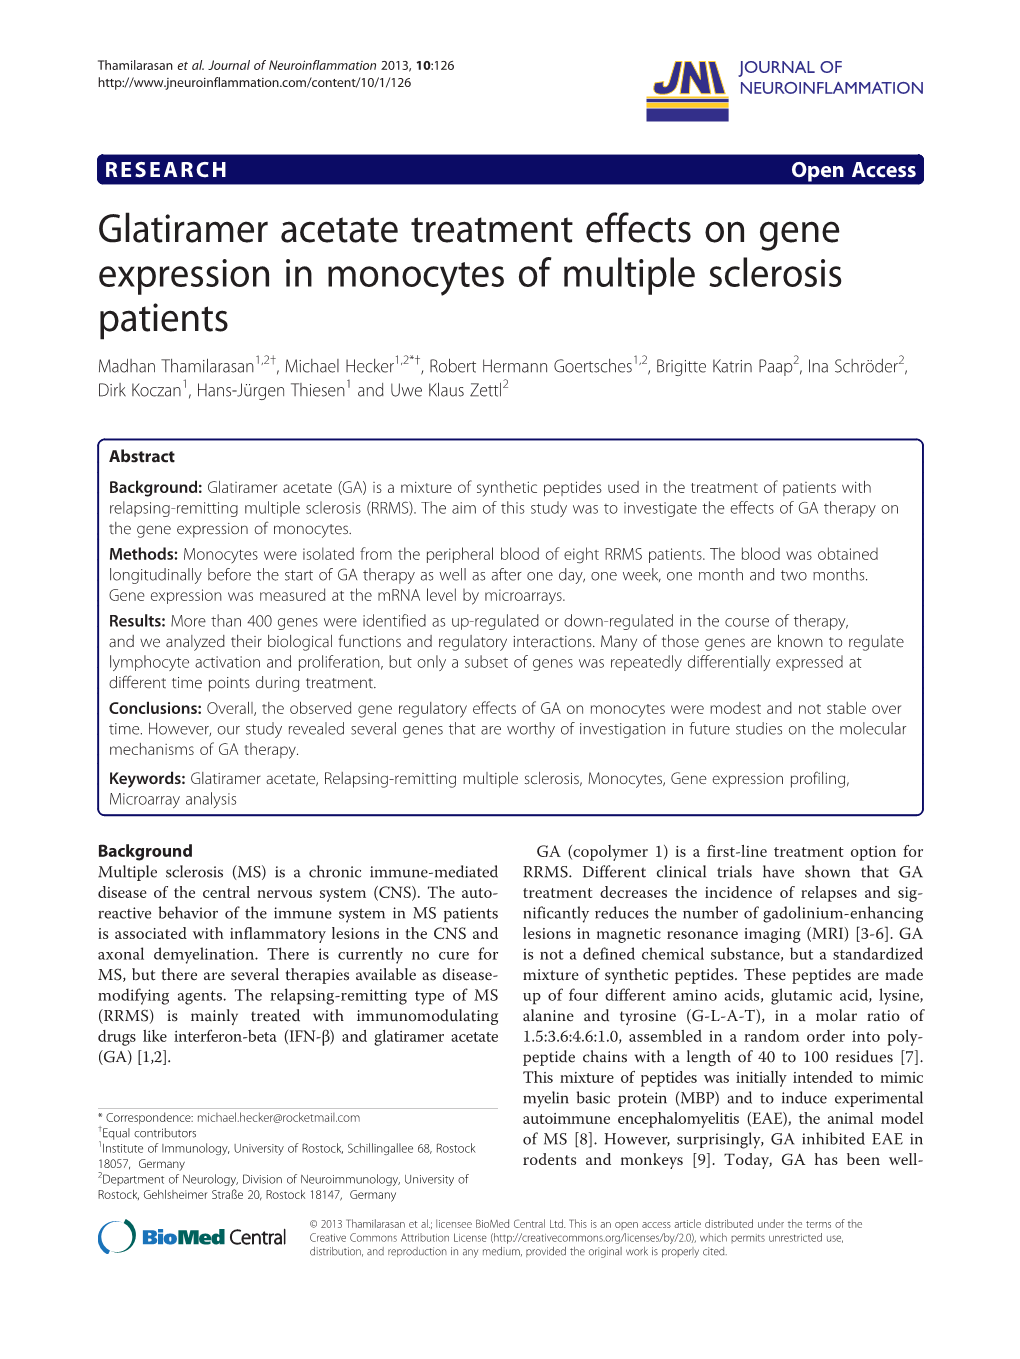 Glatiramer Acetate Treatment Effects on Gene Expression in Monocytes of Multiple Sclerosis Patients